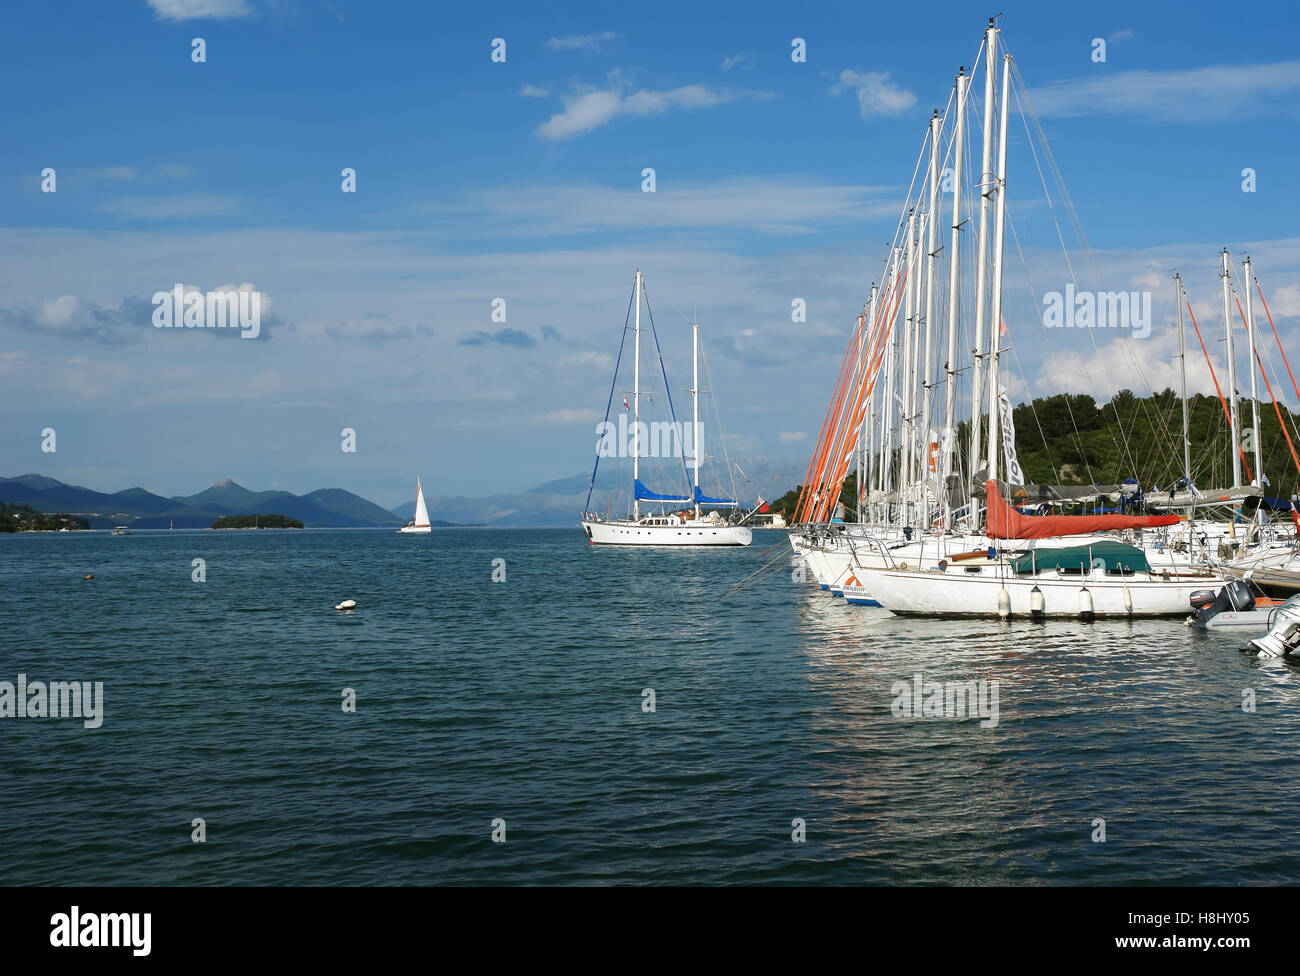 Nidri, GREECE, May 11, 2013: Landscape with blue harbour, green coast, mountains and yachts in Ionian sea, Greece. Stock Photo